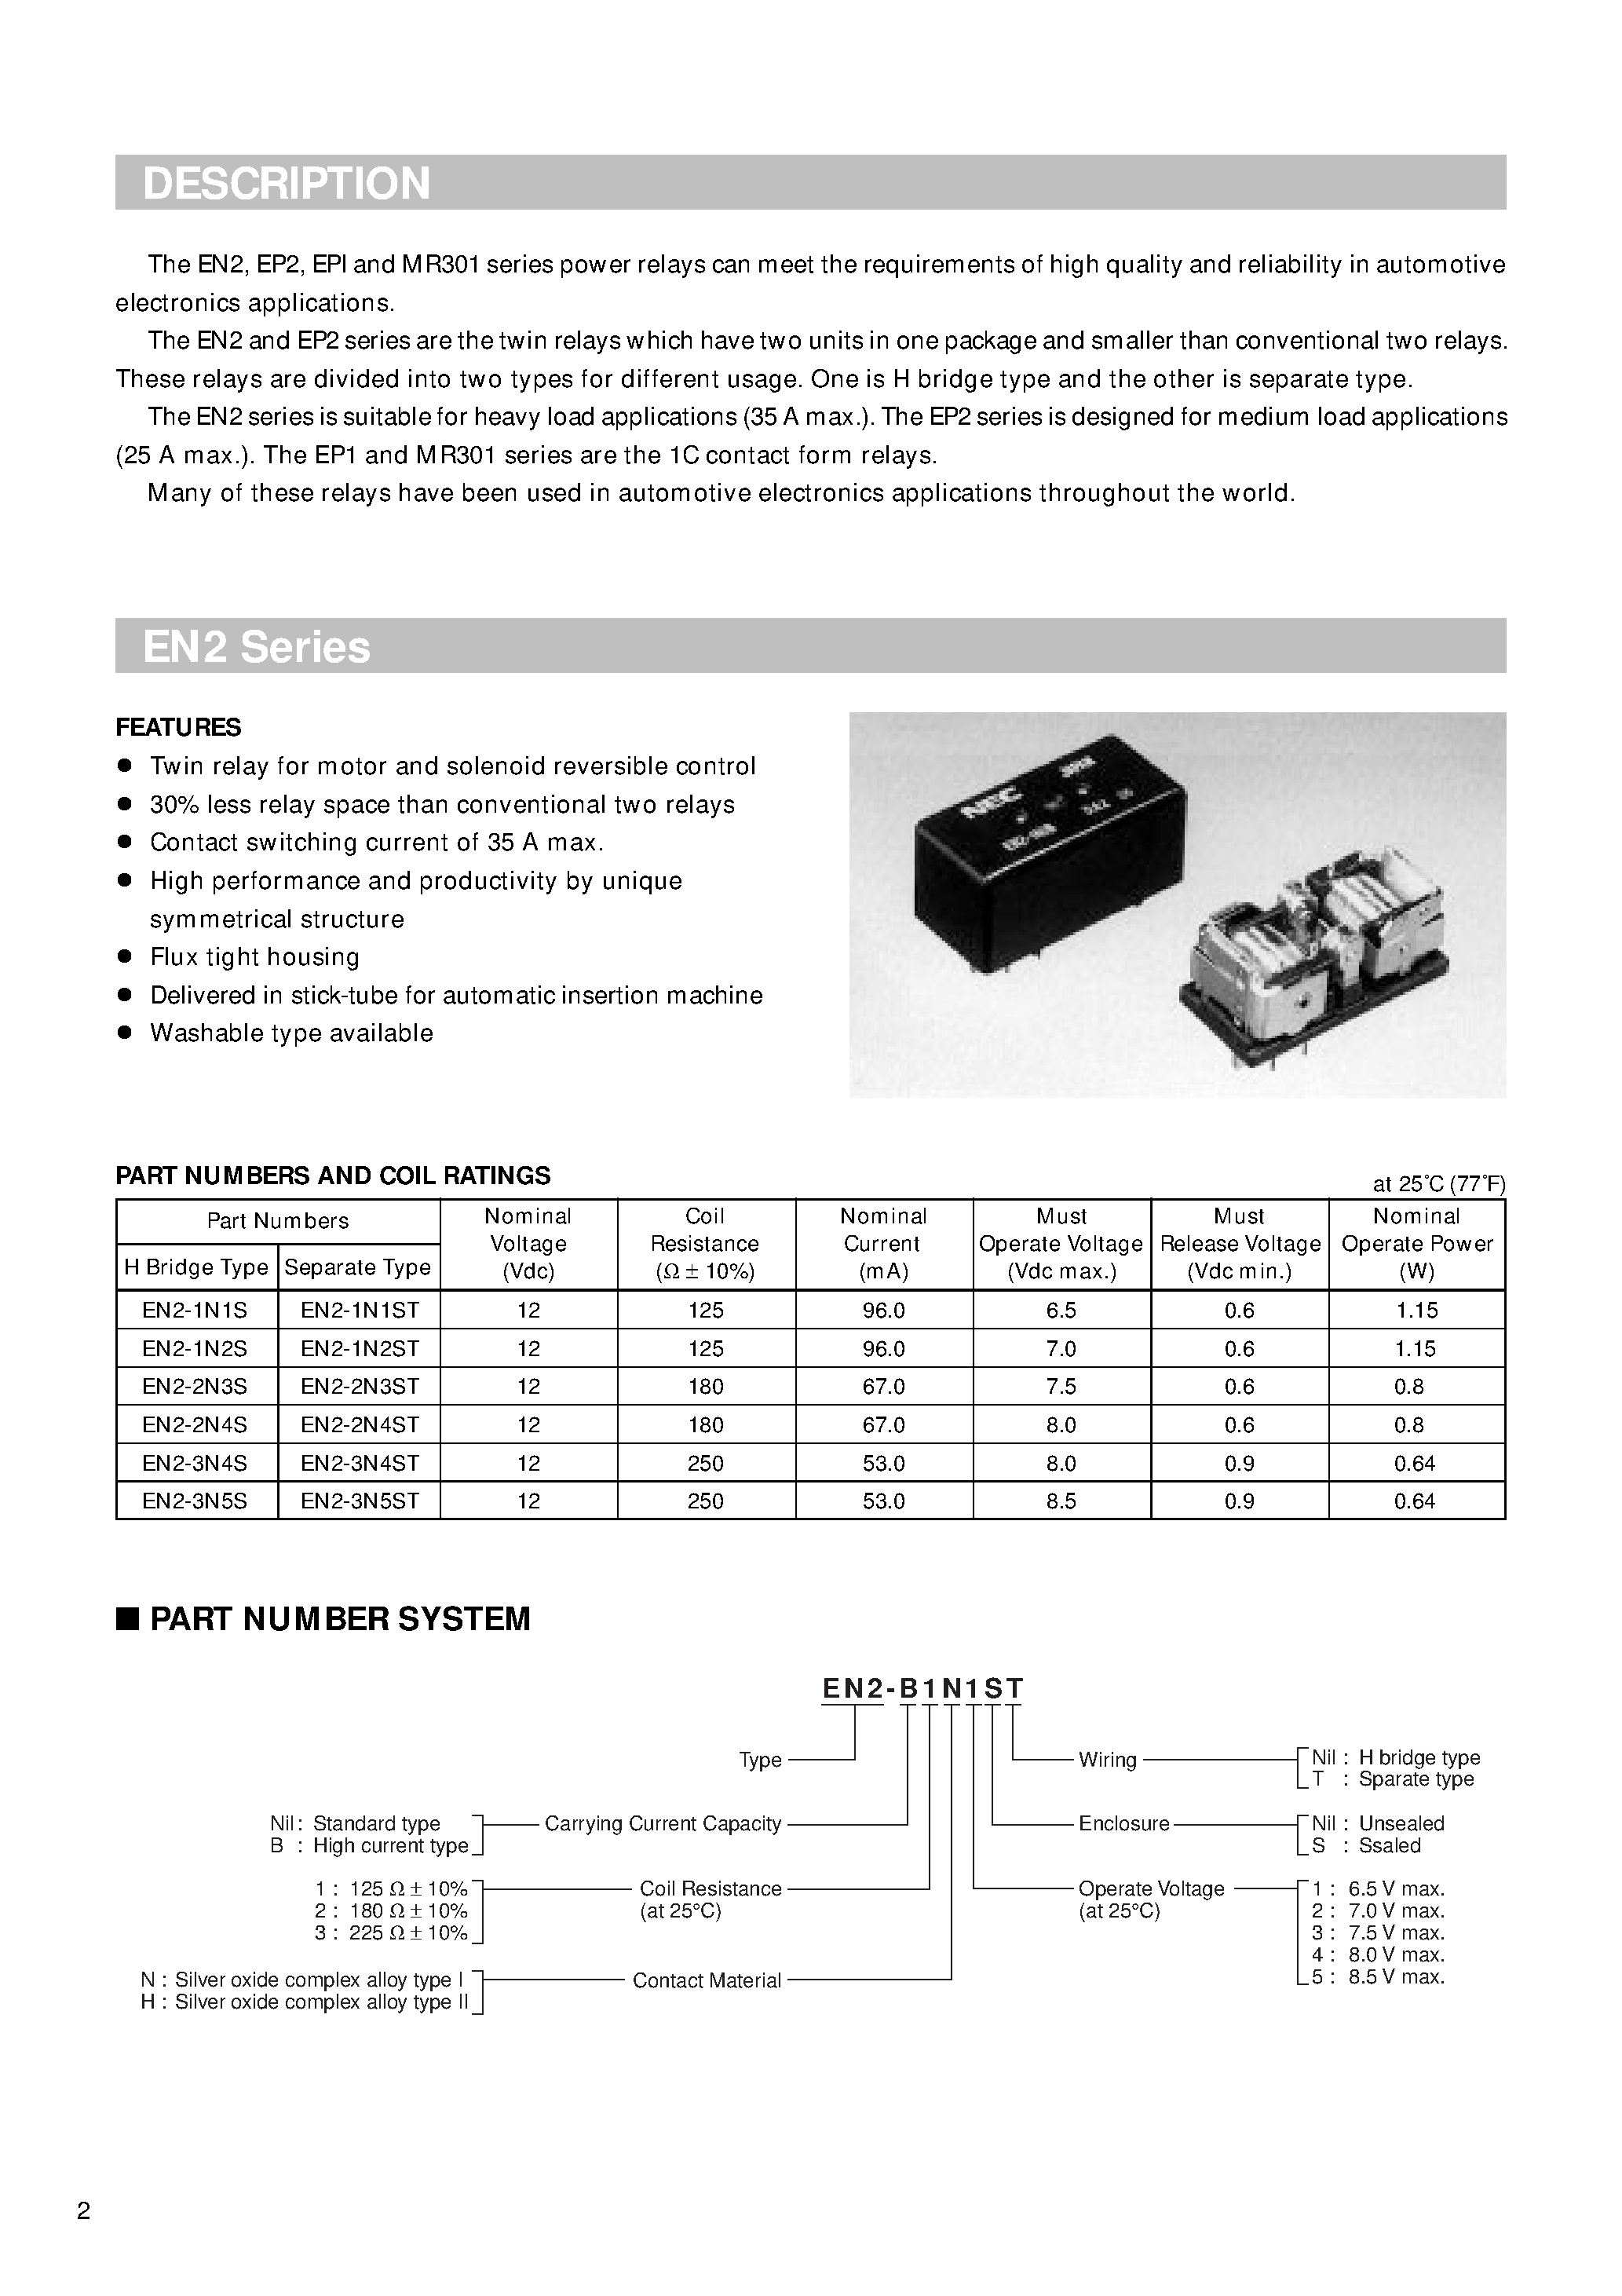 Datasheet EN2-2N3S - Twin relay for motor and solenoid reversible control page 2